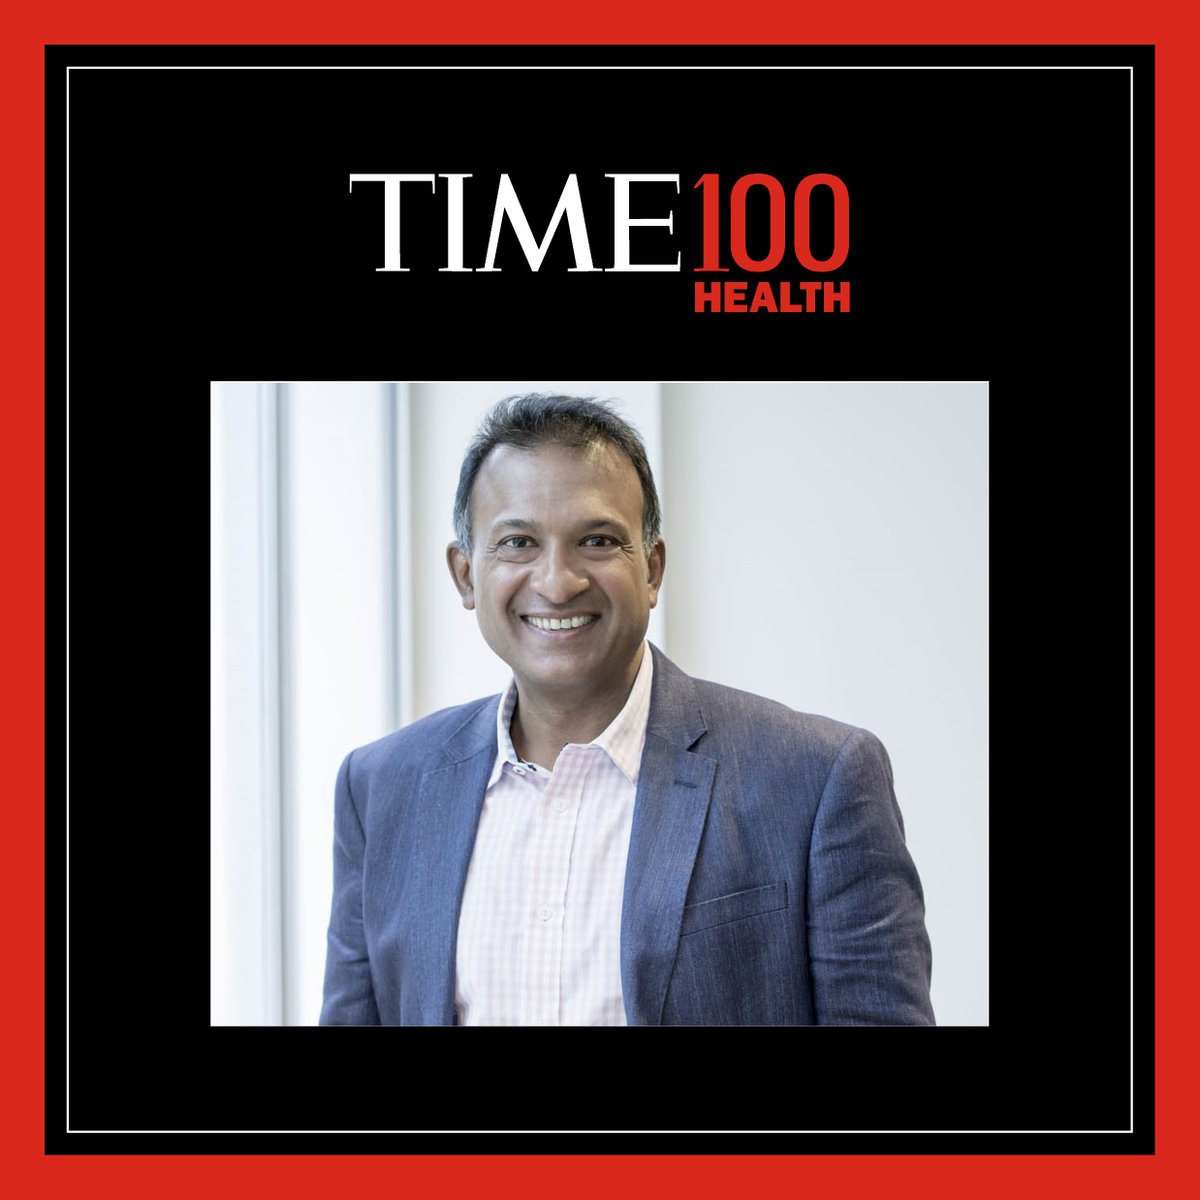 We are incredibly proud our fearless leader, Dr. @bobby_gaspar, has been named to the inaugural 2024 #TIME100HEALTH list. Please read our press release for more information: bit.ly/4bnhEWs, and see the full list of honorees here: time.com/time100health.